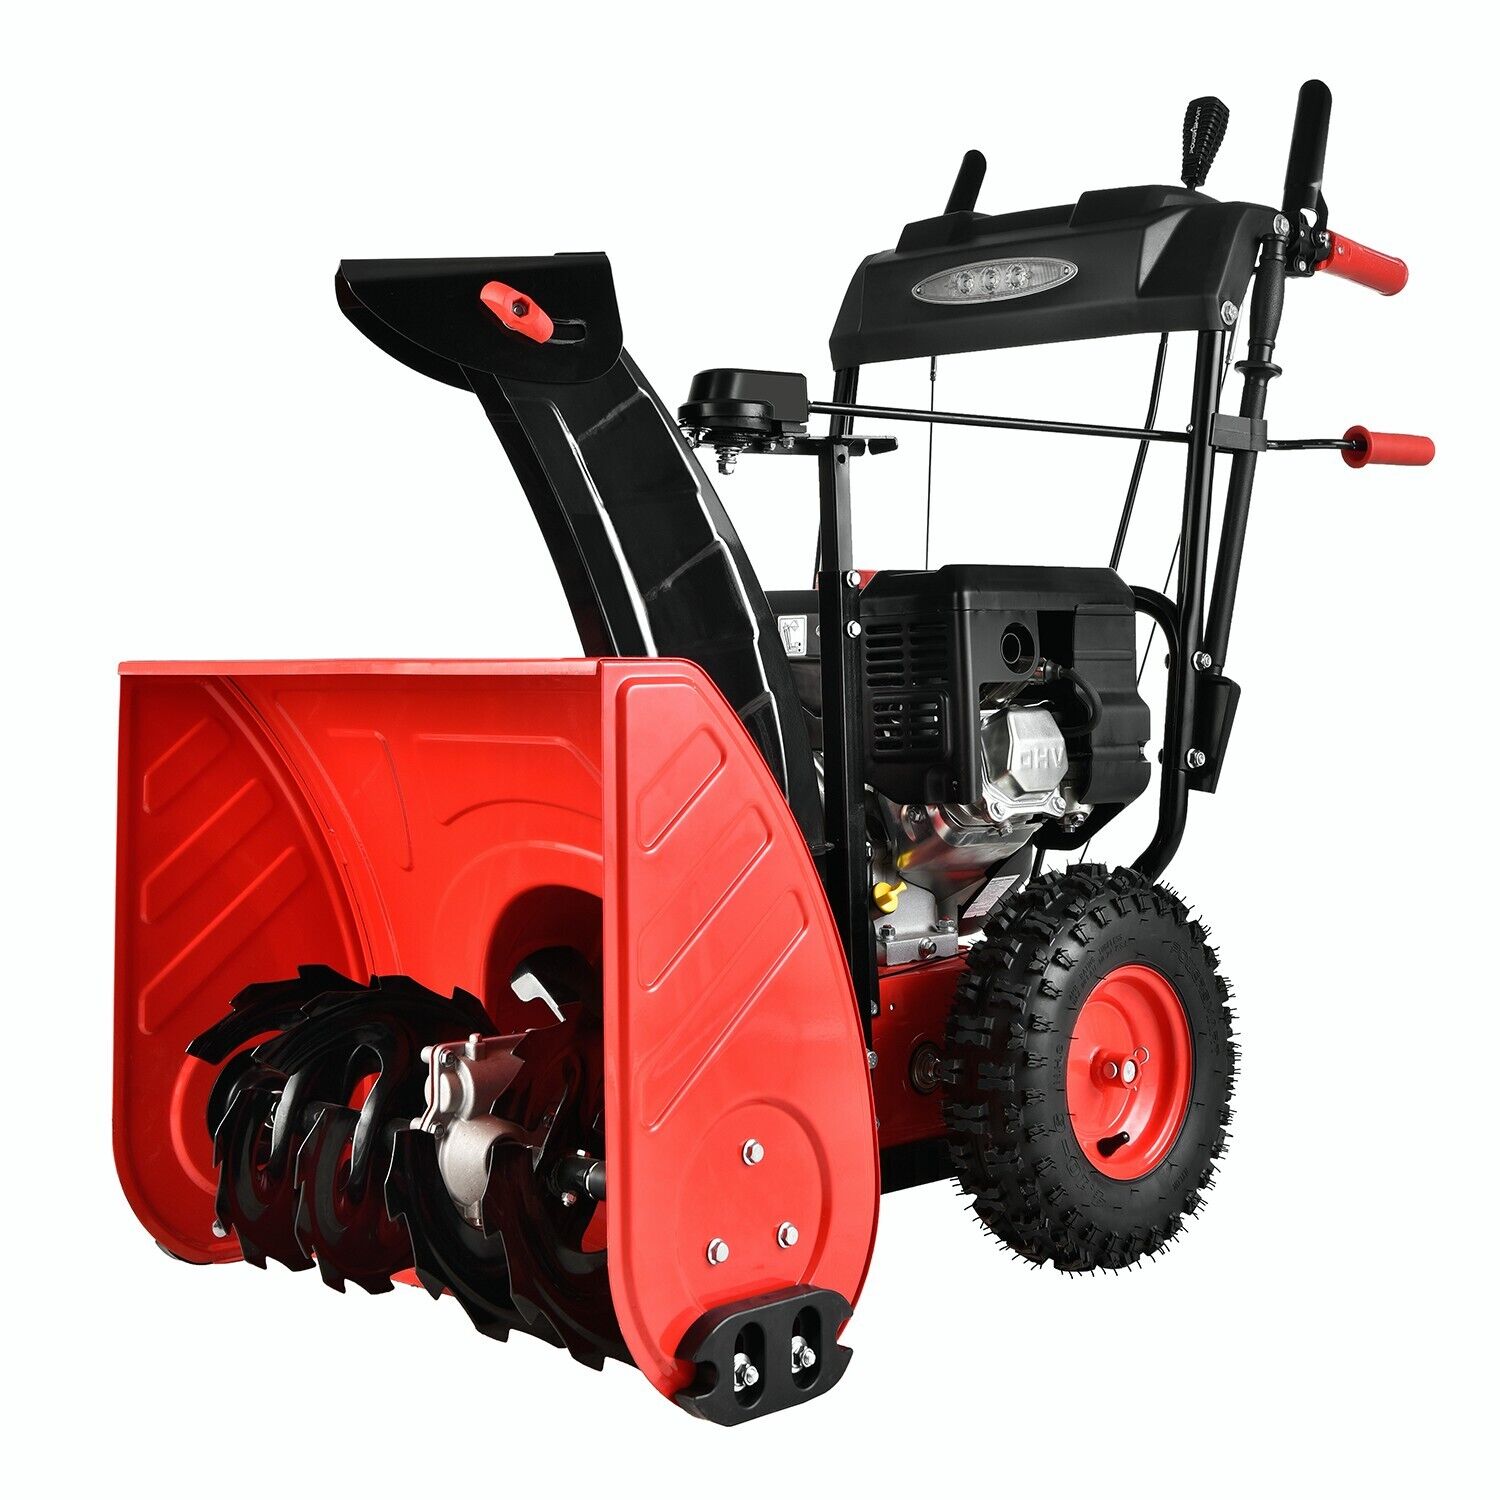 24-inch Gas Powered 212cc With Led Light/heated Handle